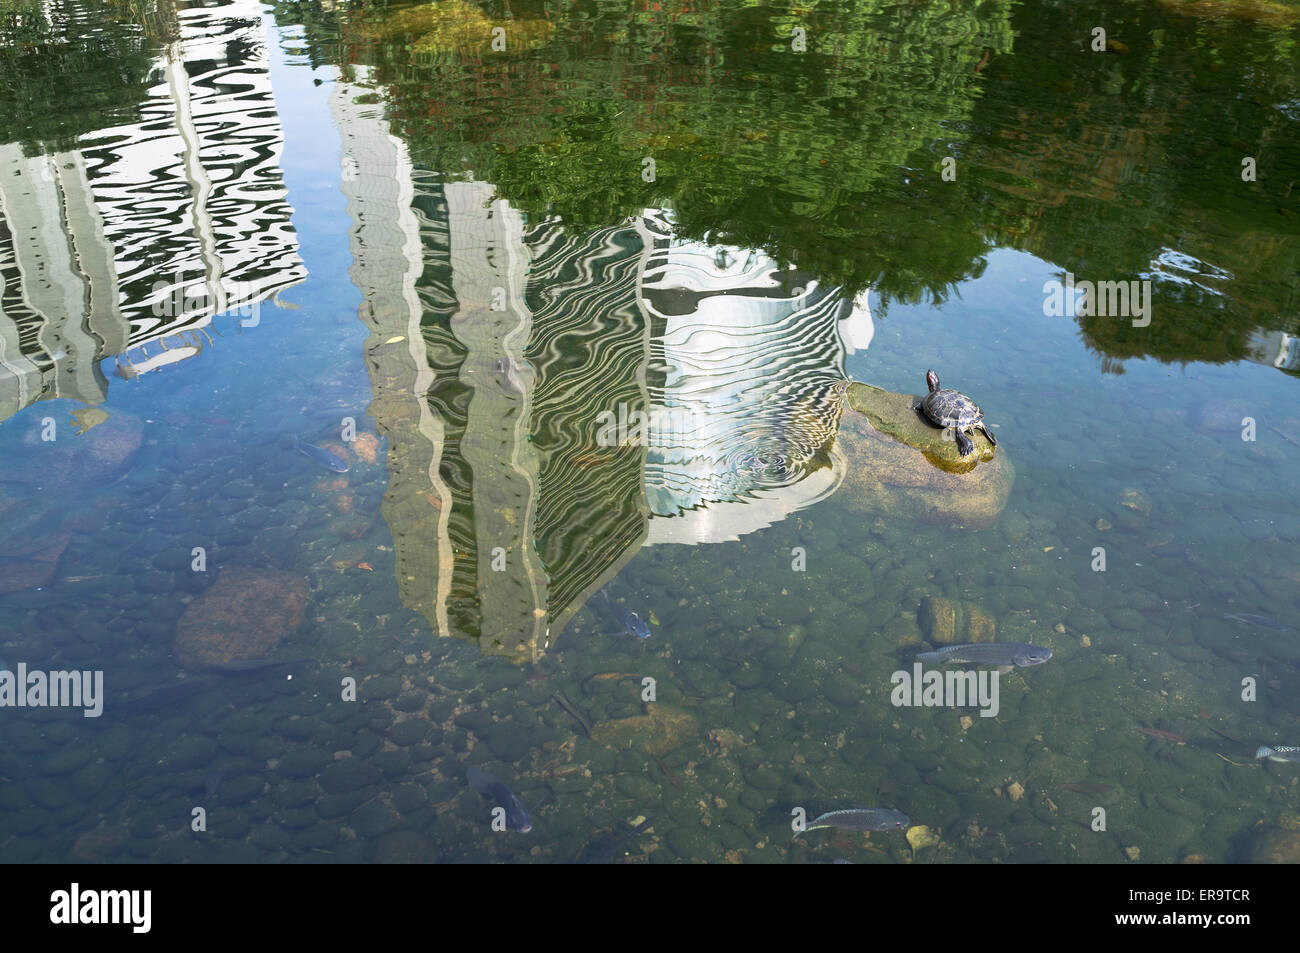 dh Hong Kong Park CENTRAL HONG KONG Terrapin turtle in Fish pond reflection skyscraper water parks asia Stock Photo